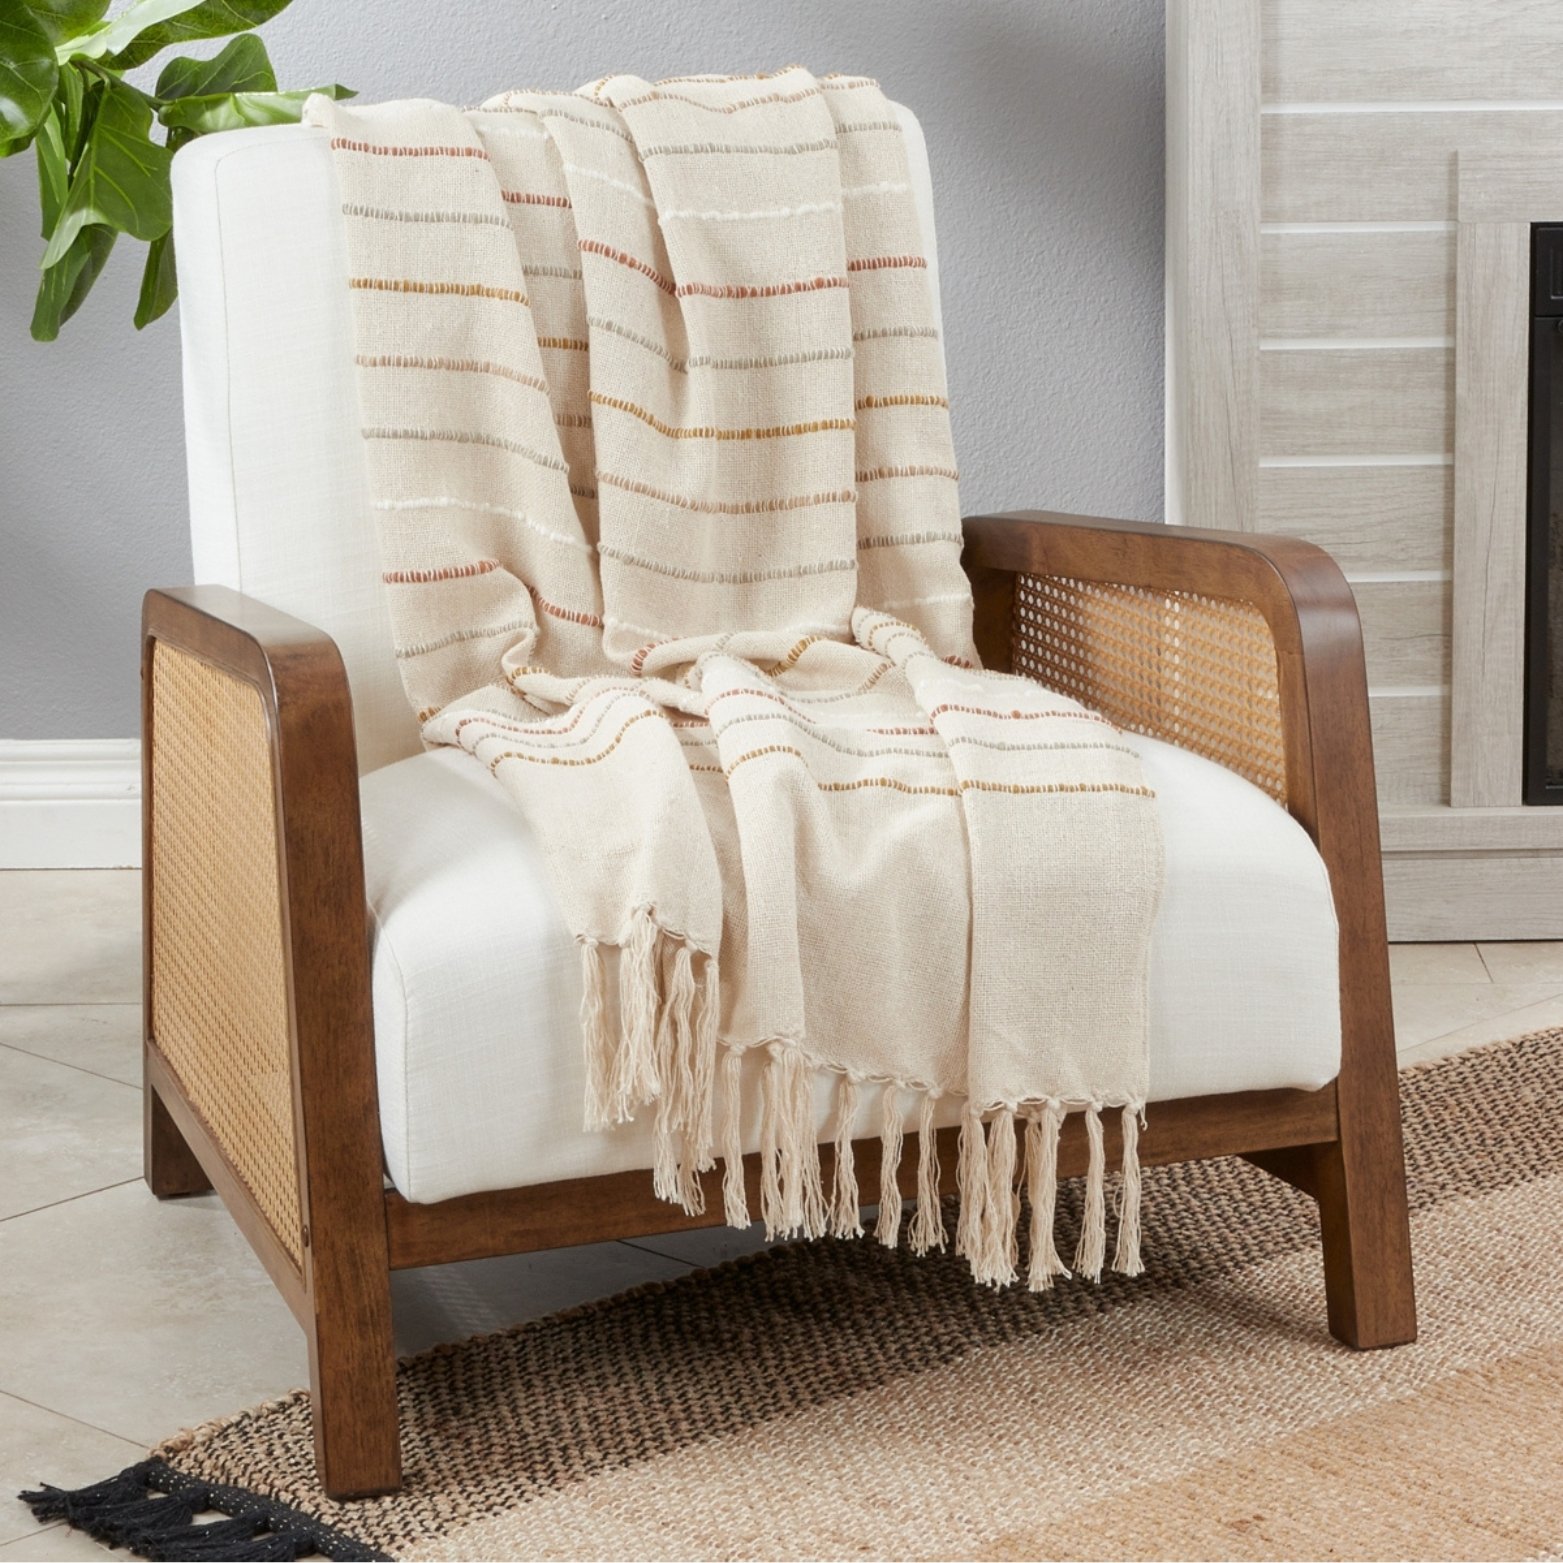 Cream Throw Blanket with Embroidered Muted Tones and Tassels.jpg